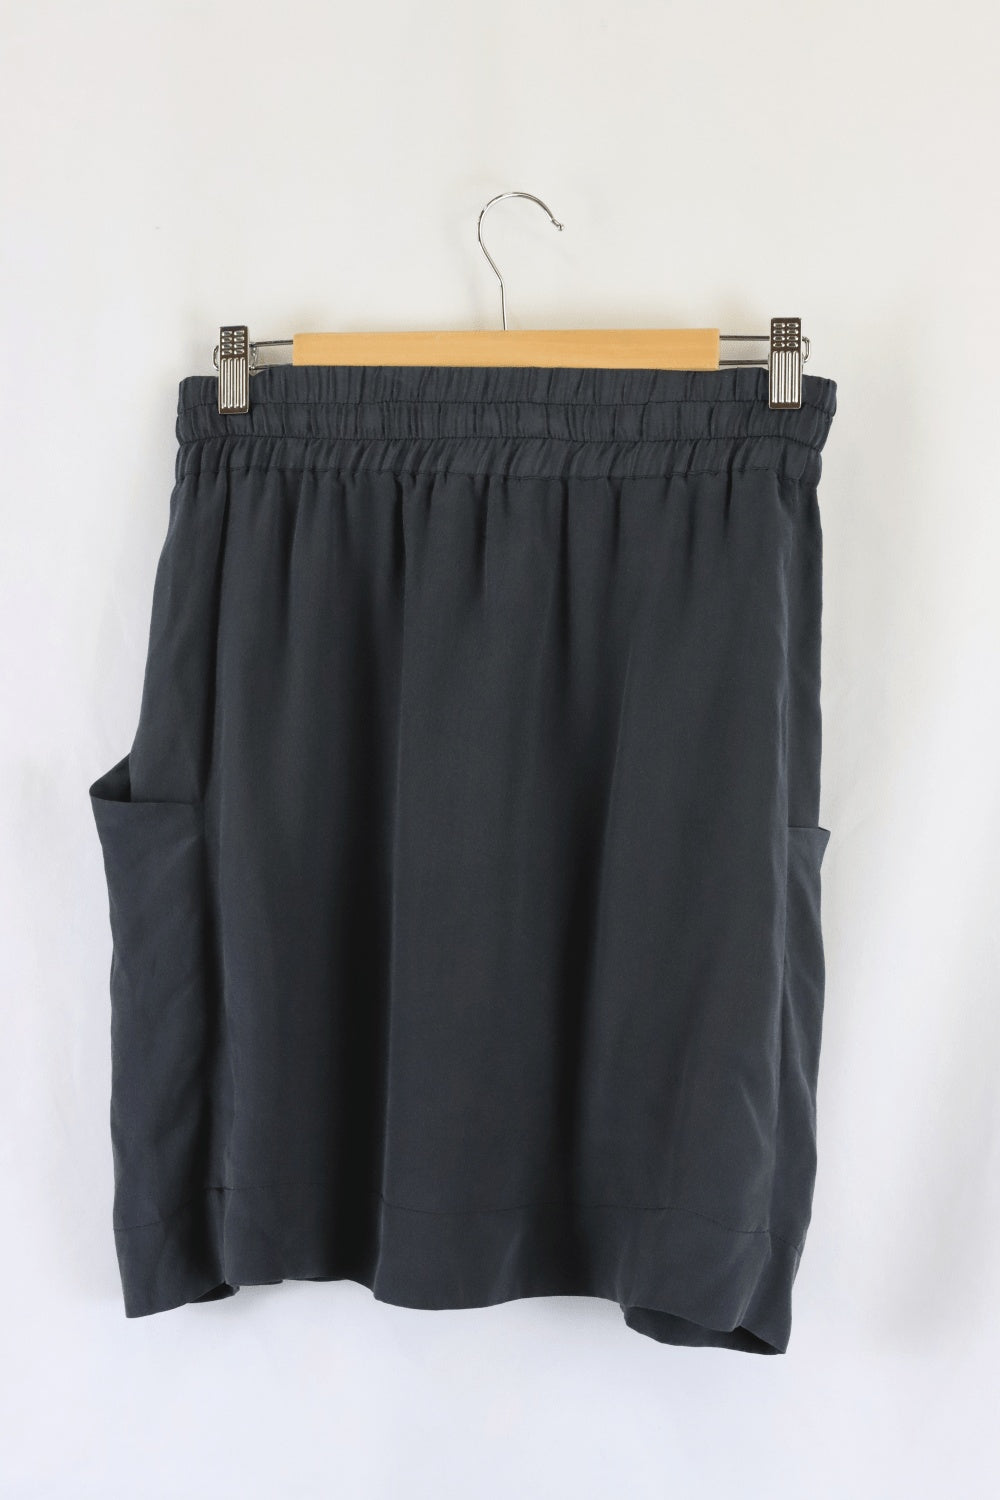 Witchery Charcoal Skirt 6